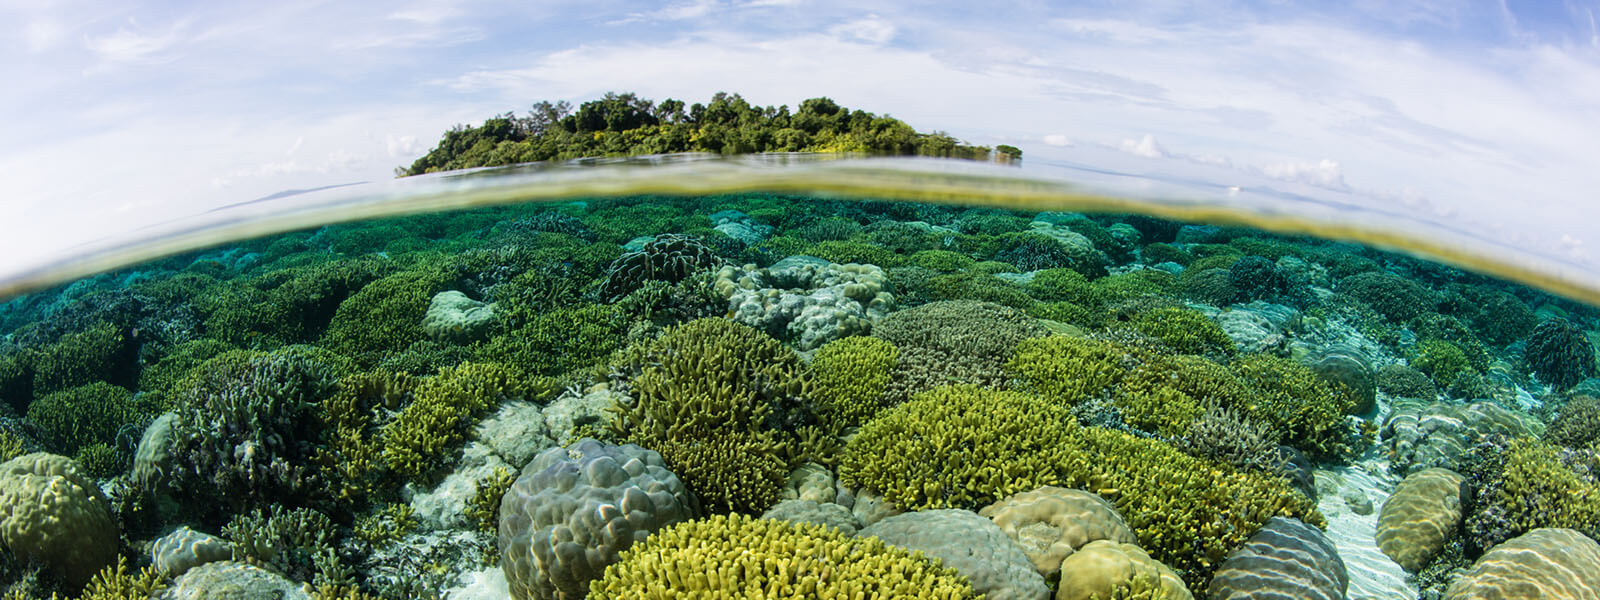 Huge stretches of shallow reef can be found in Kimbe Bay, Papua New Guinea